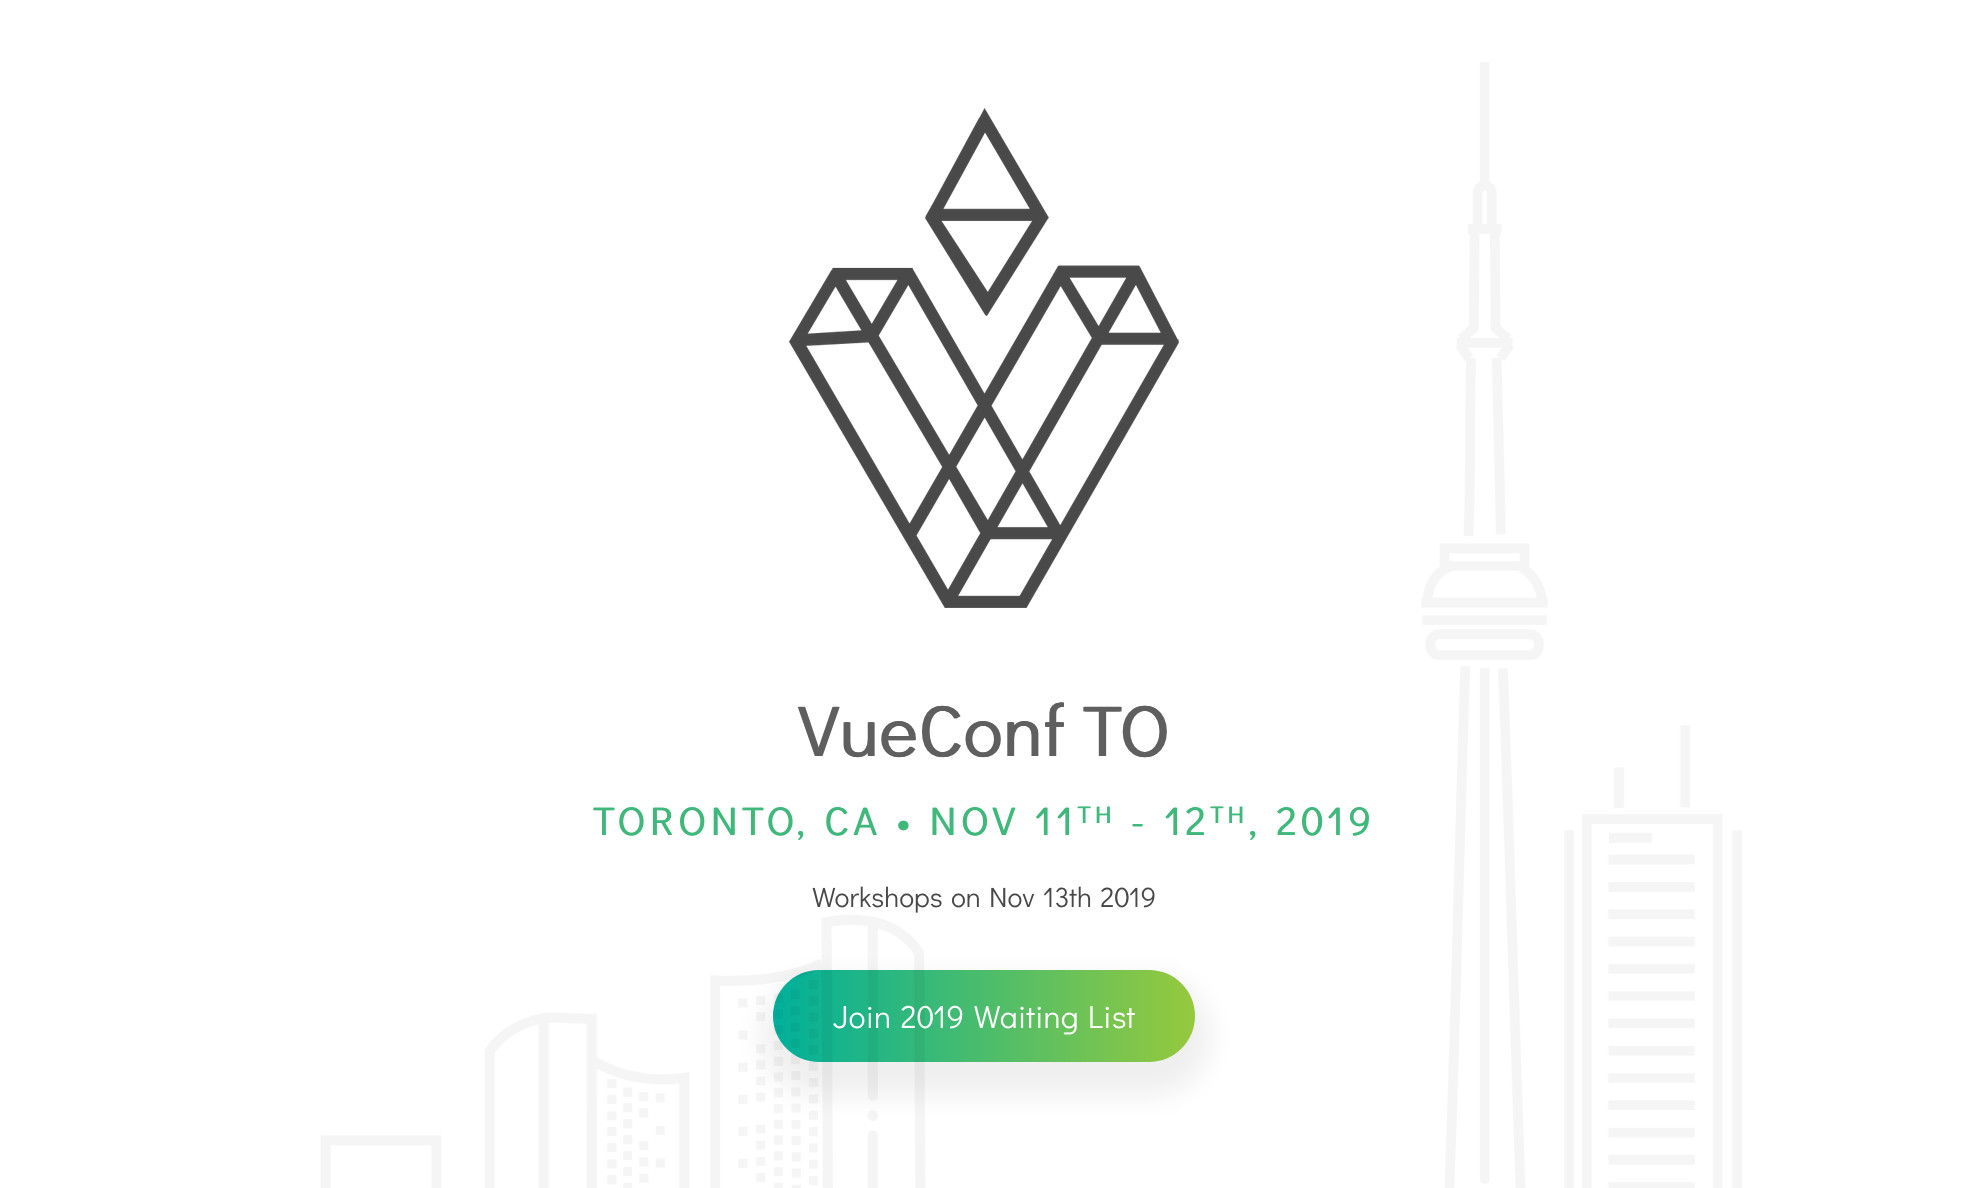 VueConfTO 2019 - Call For Papers